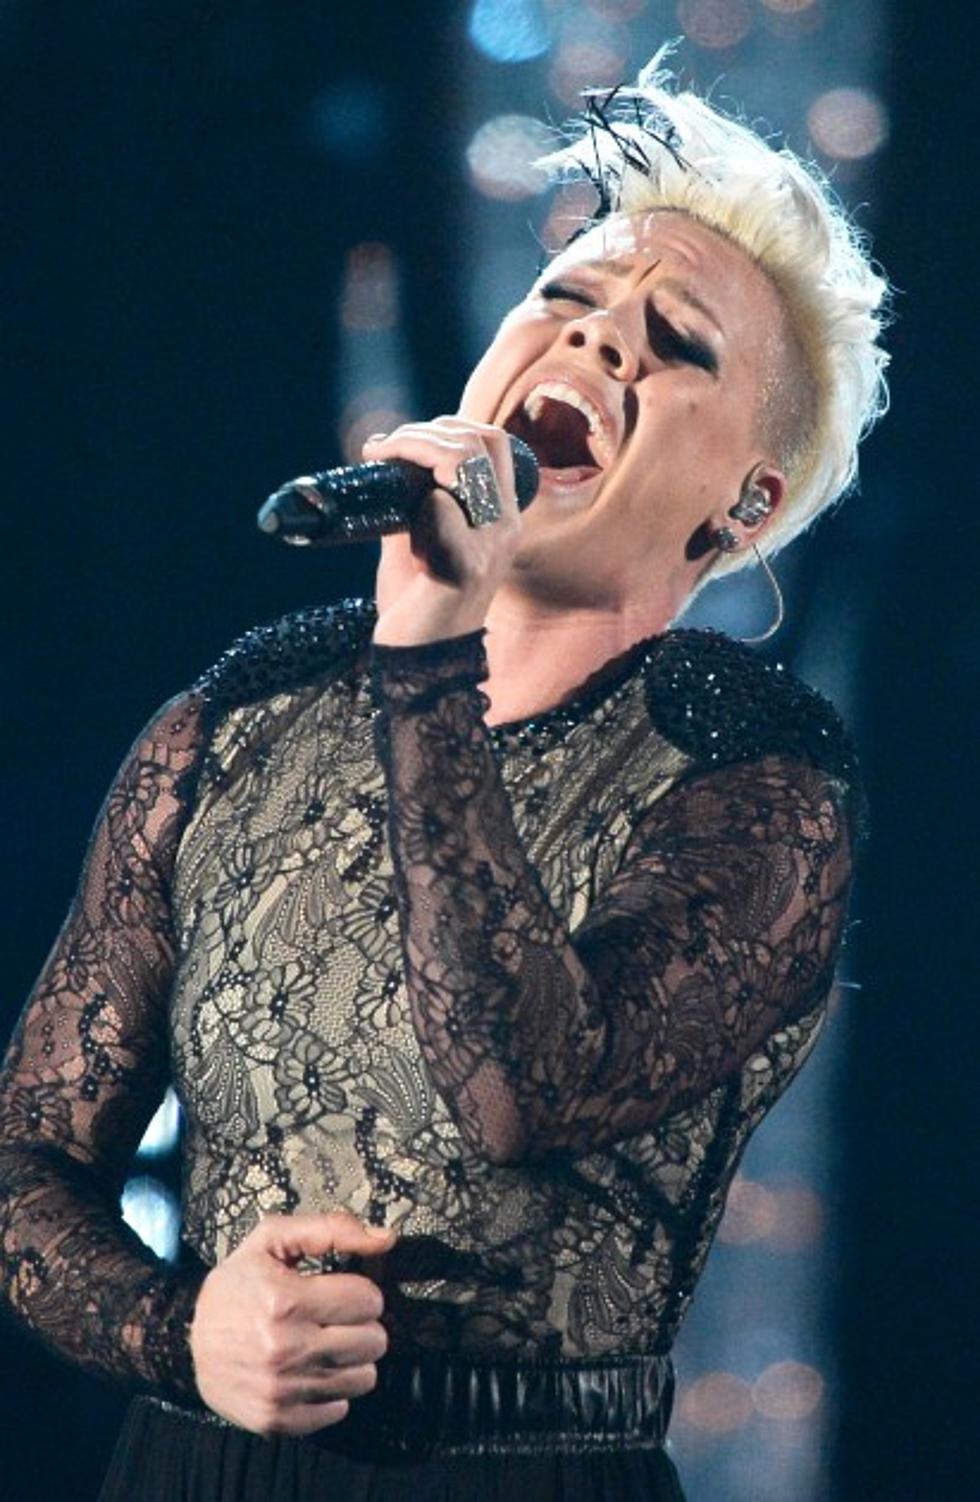 Pink Sings &#8216;Try’ + ‘Just Give Me A Reason’ featuring Nate Ruess at the 2014 Grammy Awards